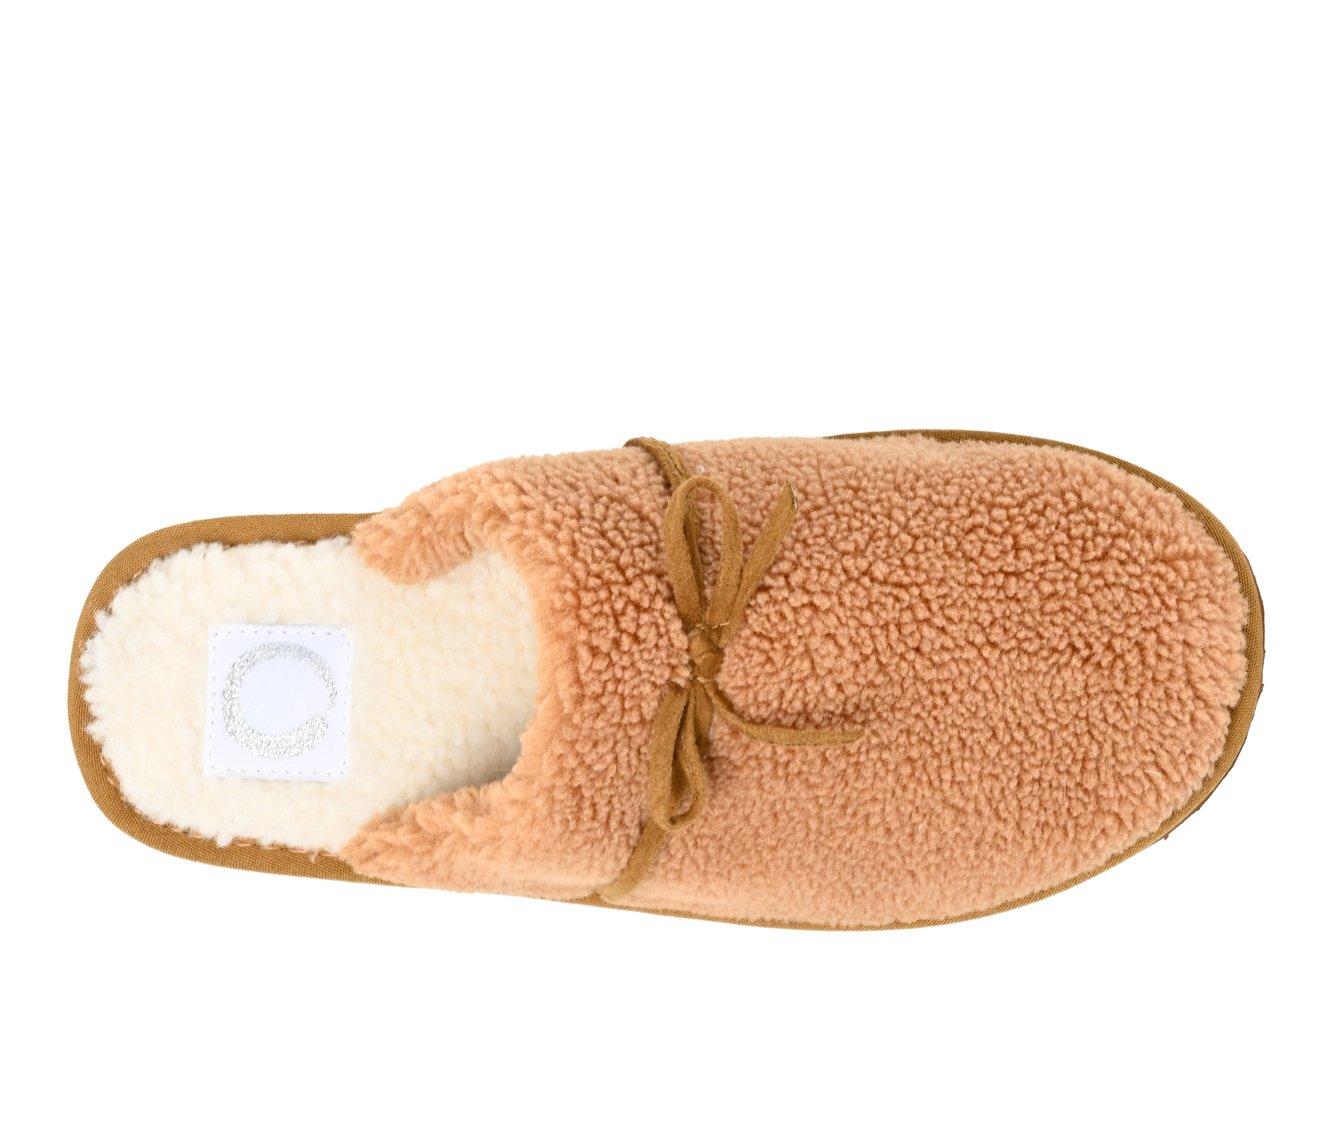 Journee Collection Melodie Slippers